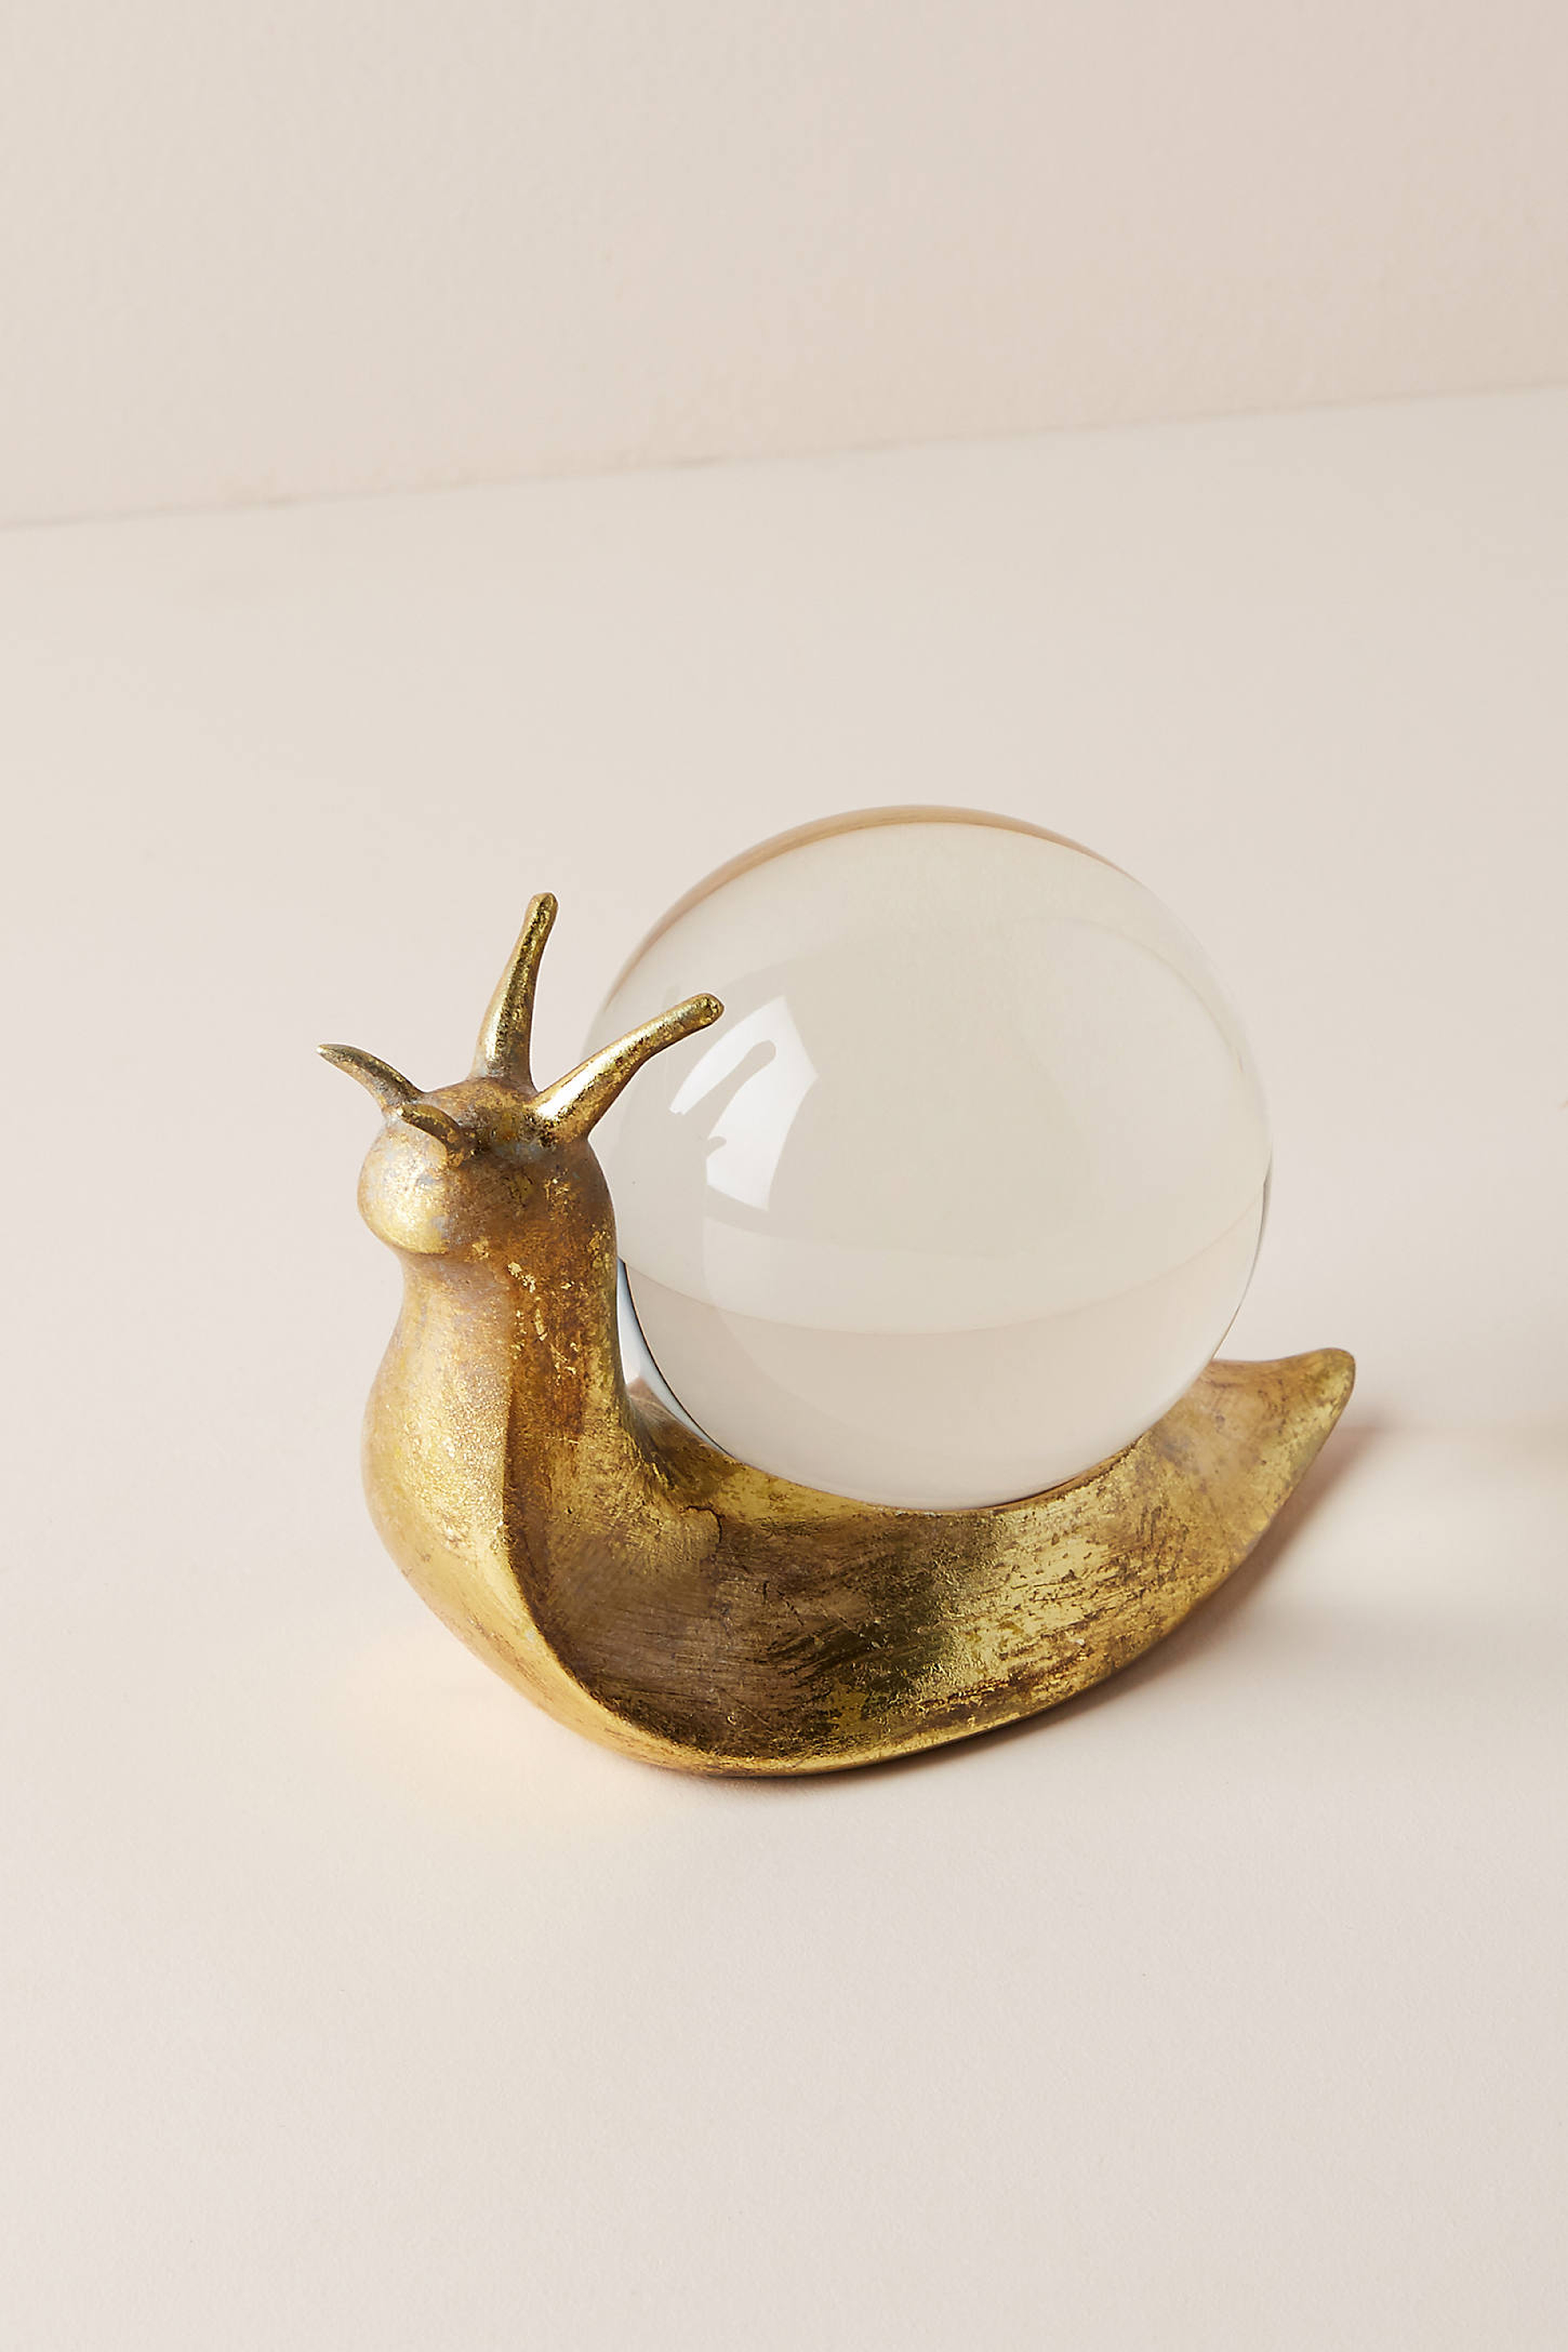 Snail Decorative Object, Gold - Anthropologie